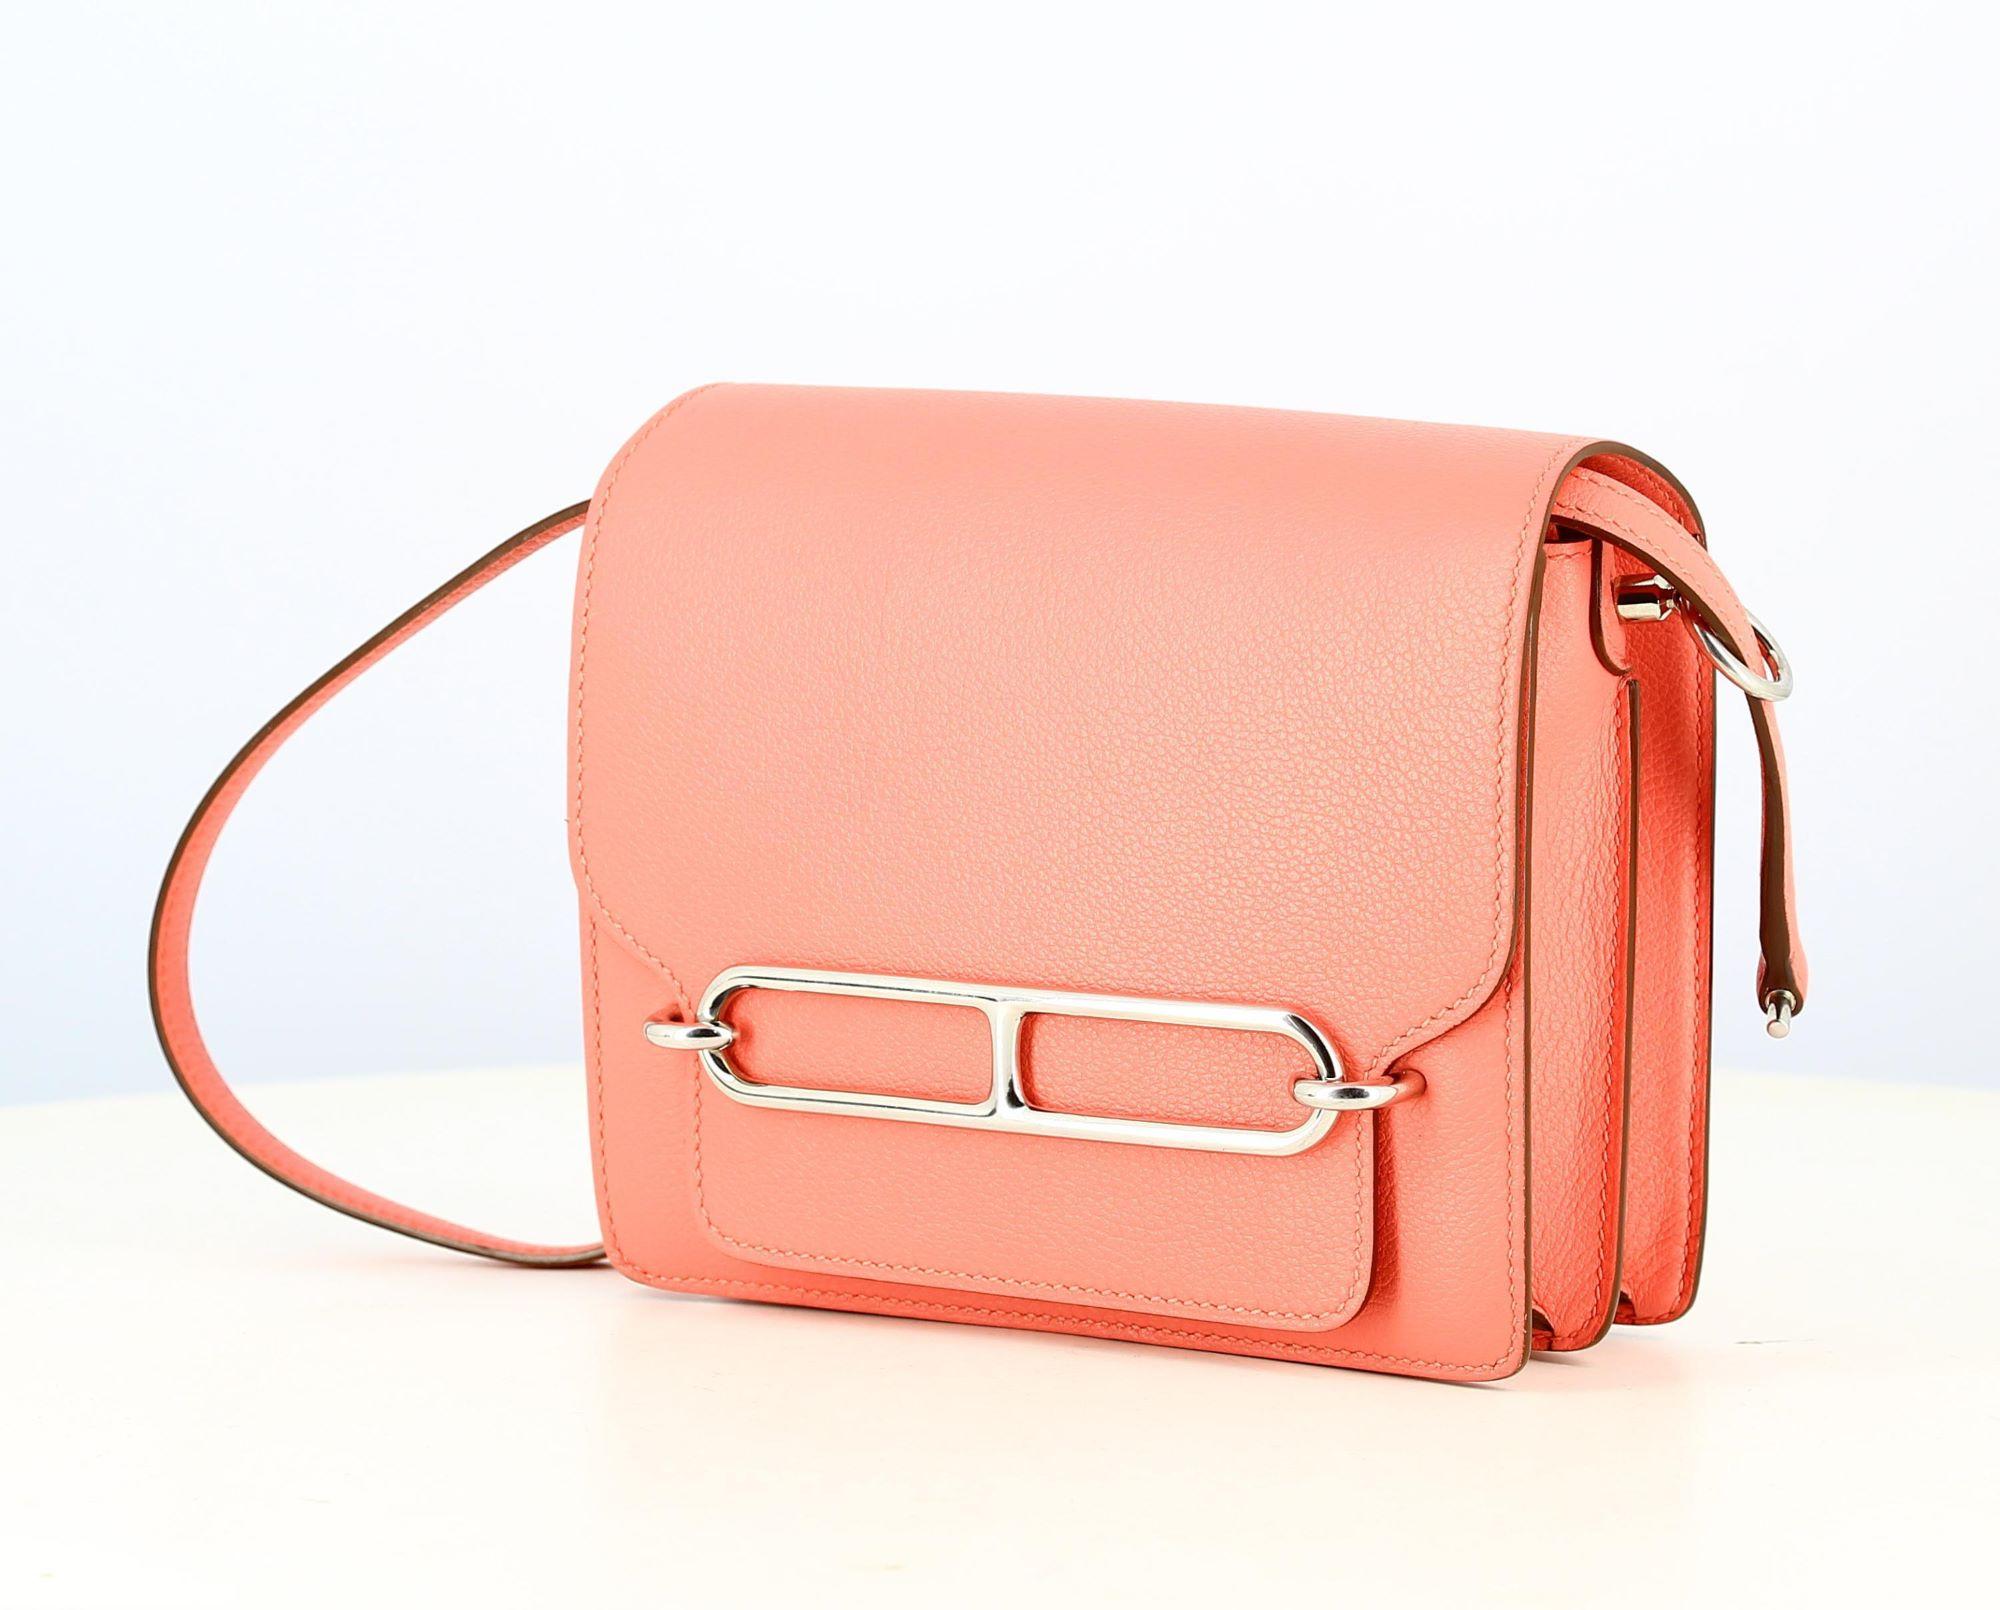 2019 Hermes Pink Mini Roulis
- Good condition, shows slight wear and tear over time - Hermes pink shoulder bag, palladium with H on the front, opens like an envelope, long pink leather shoulder strap. Small pocket on the back of the bag
- The inside